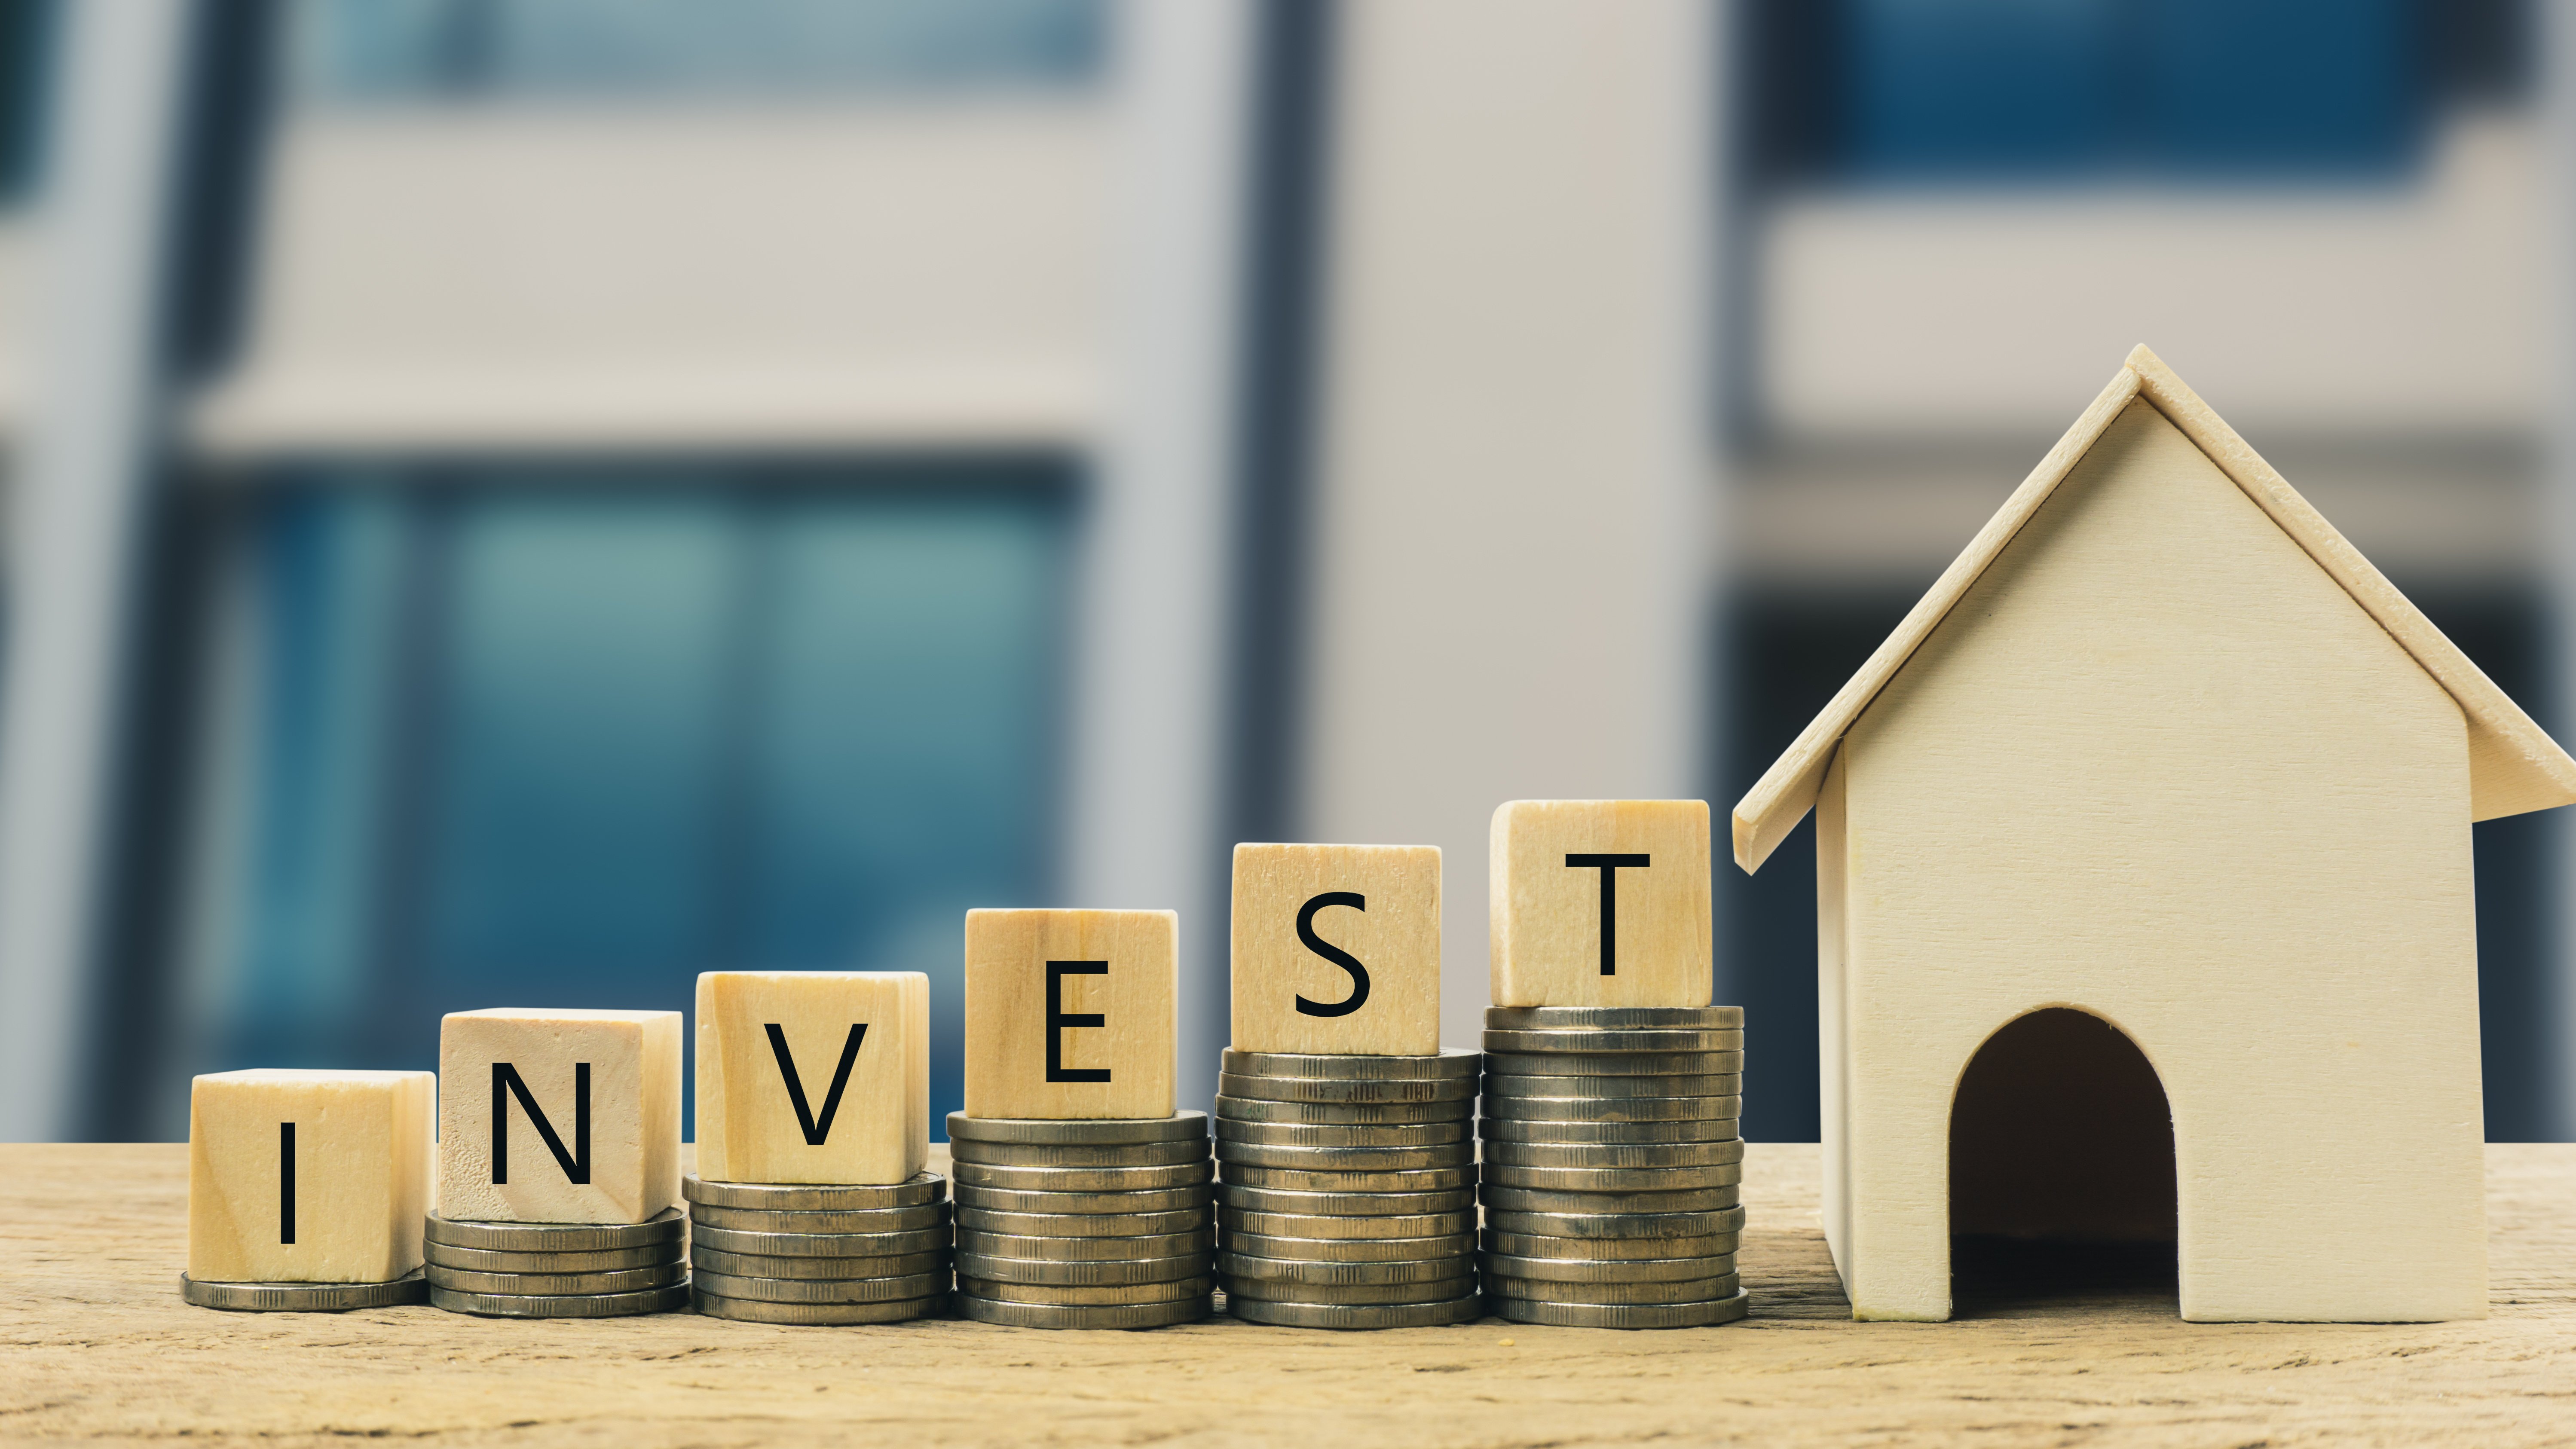 investing over time to save money for a house